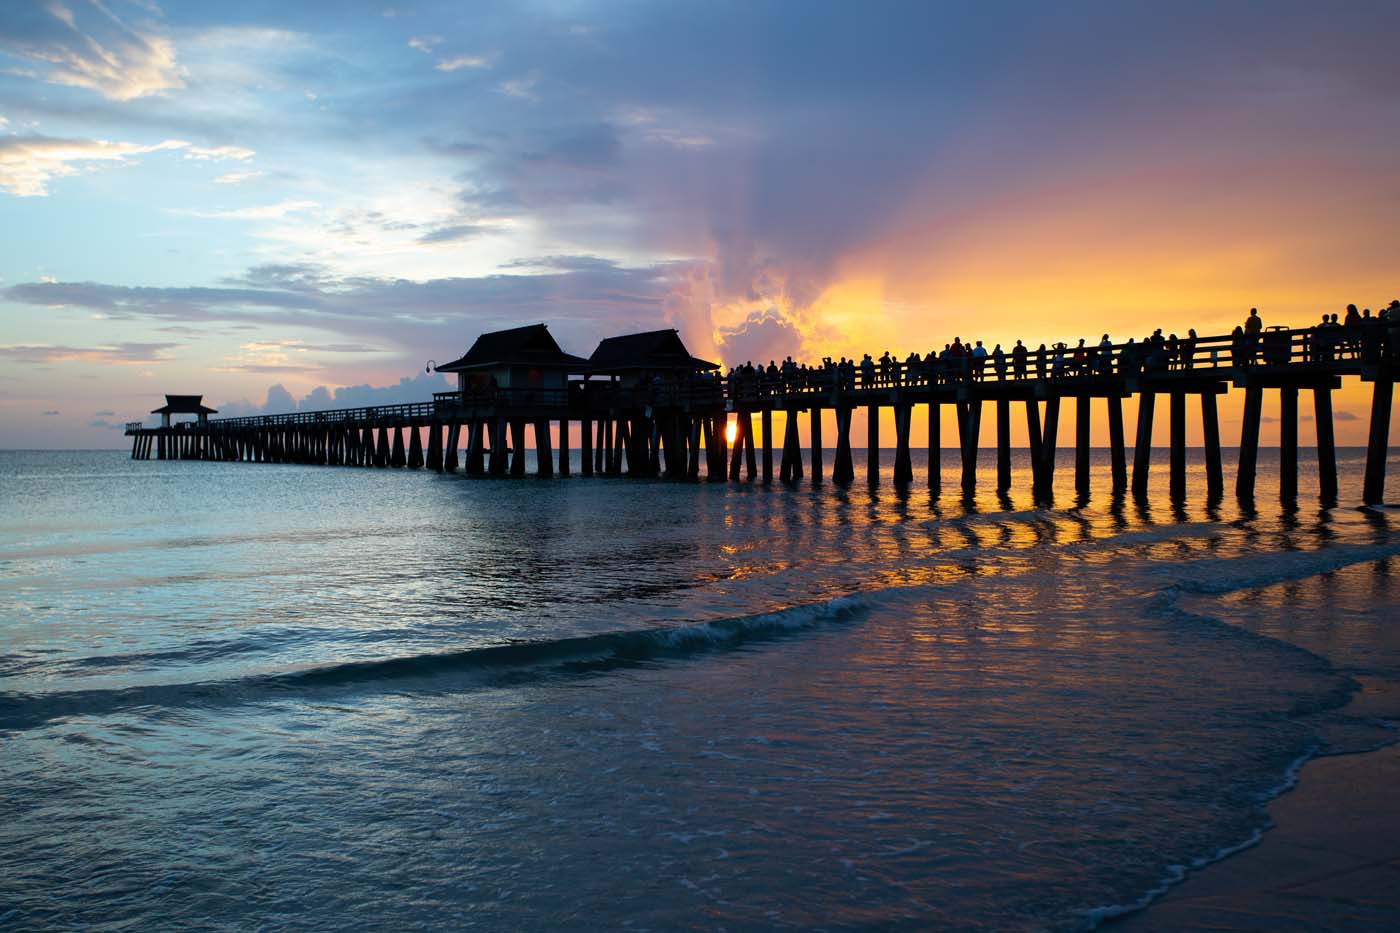 Naples Pier Sunset over the water